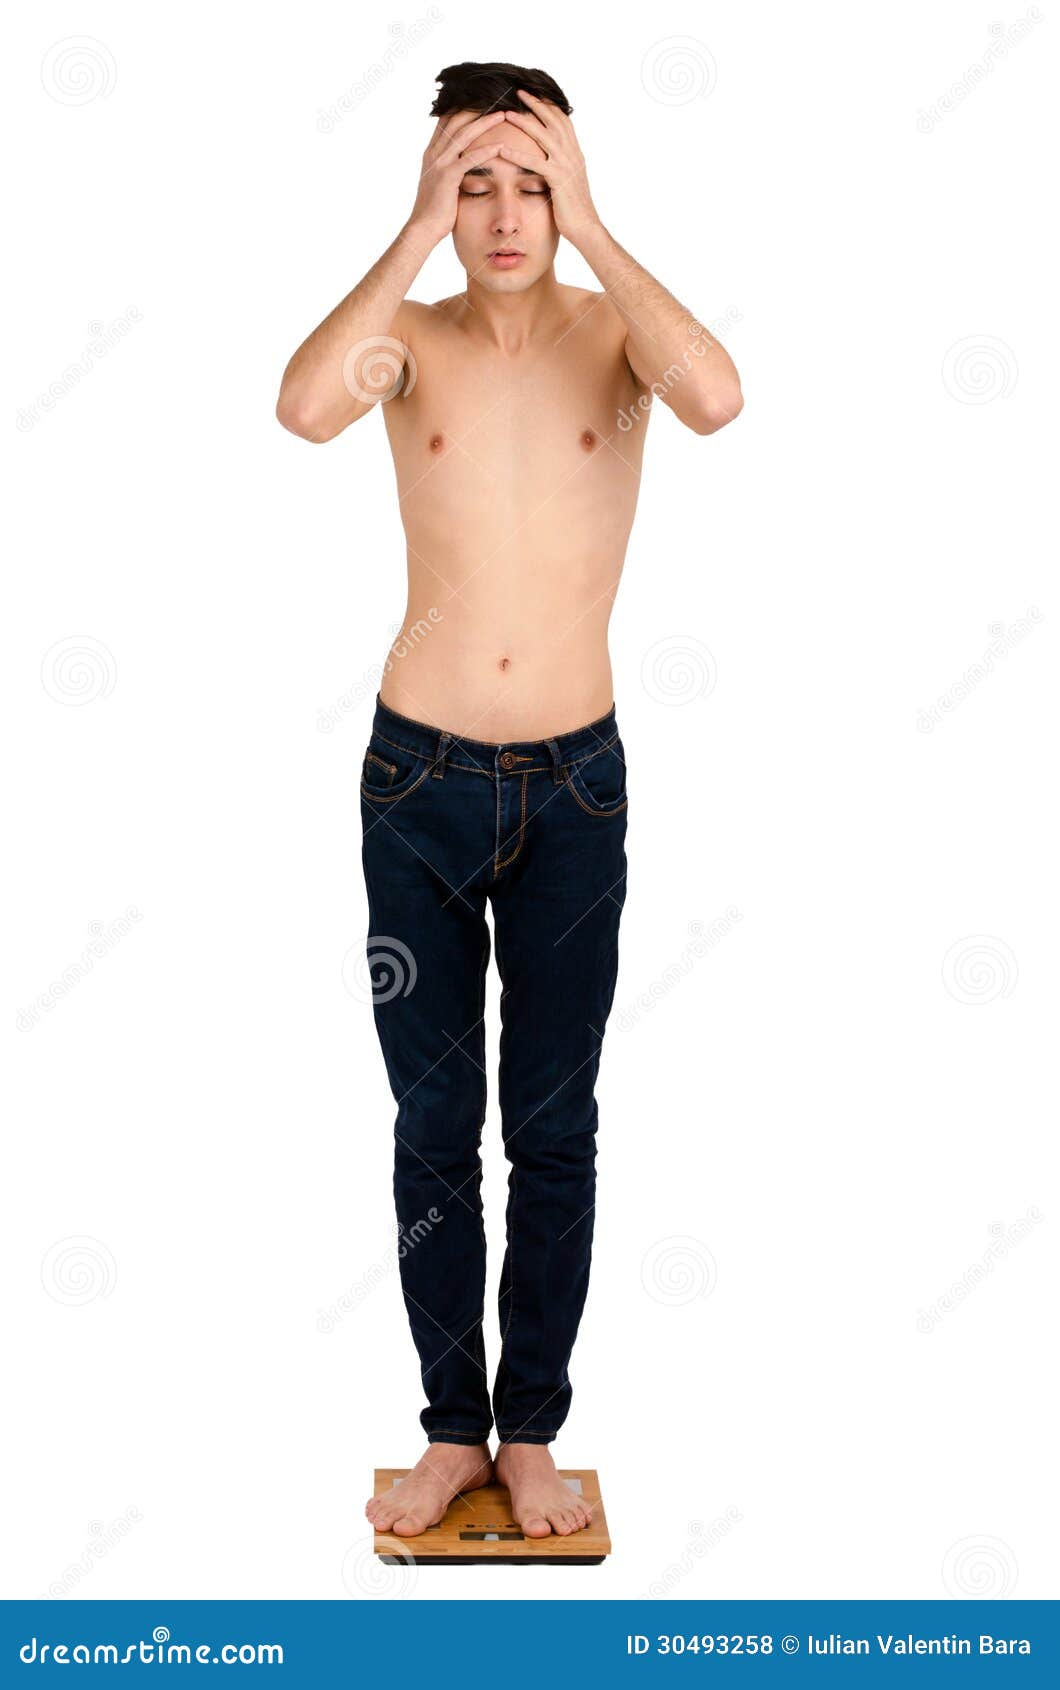 104 Skinny Man Scale Photos Free Royalty Free Stock Photos From Dreamstime